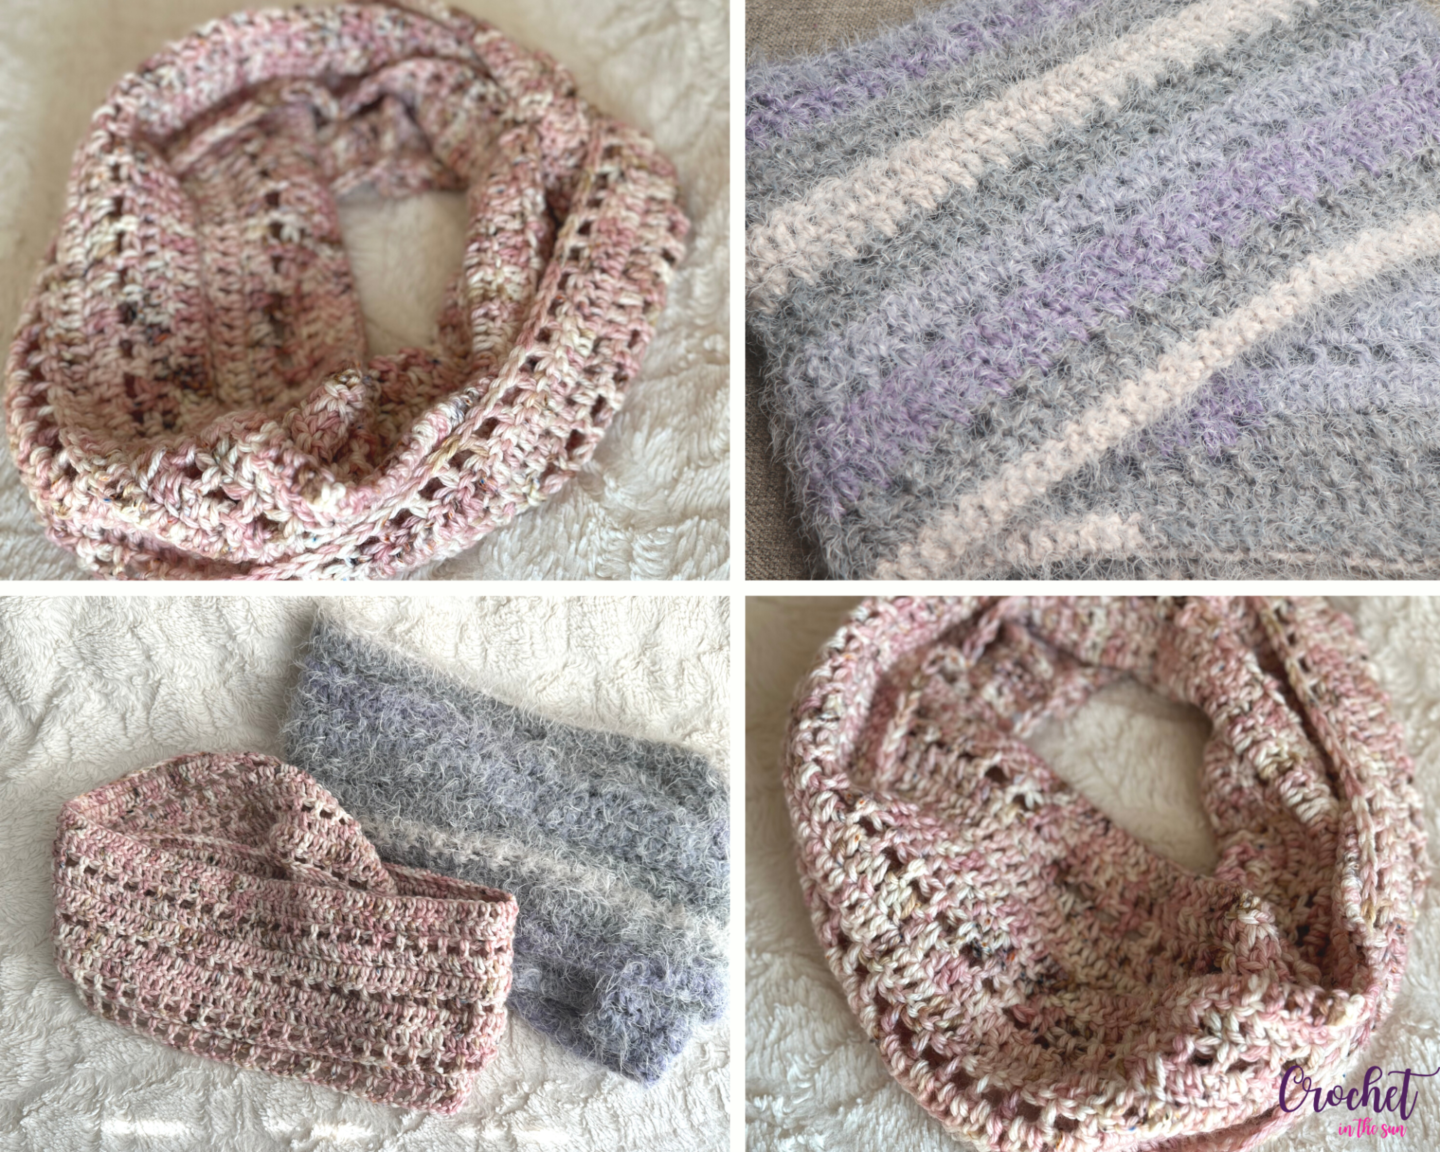 FREE and easy crochet scarf project. This features my 'Open Windows' stitch which is an easy stitch repeat, and works up to be so beautiful! Crochet project that is beginner friendly! Free crochet pattern, lets do it! It's a great winter crochet idea.